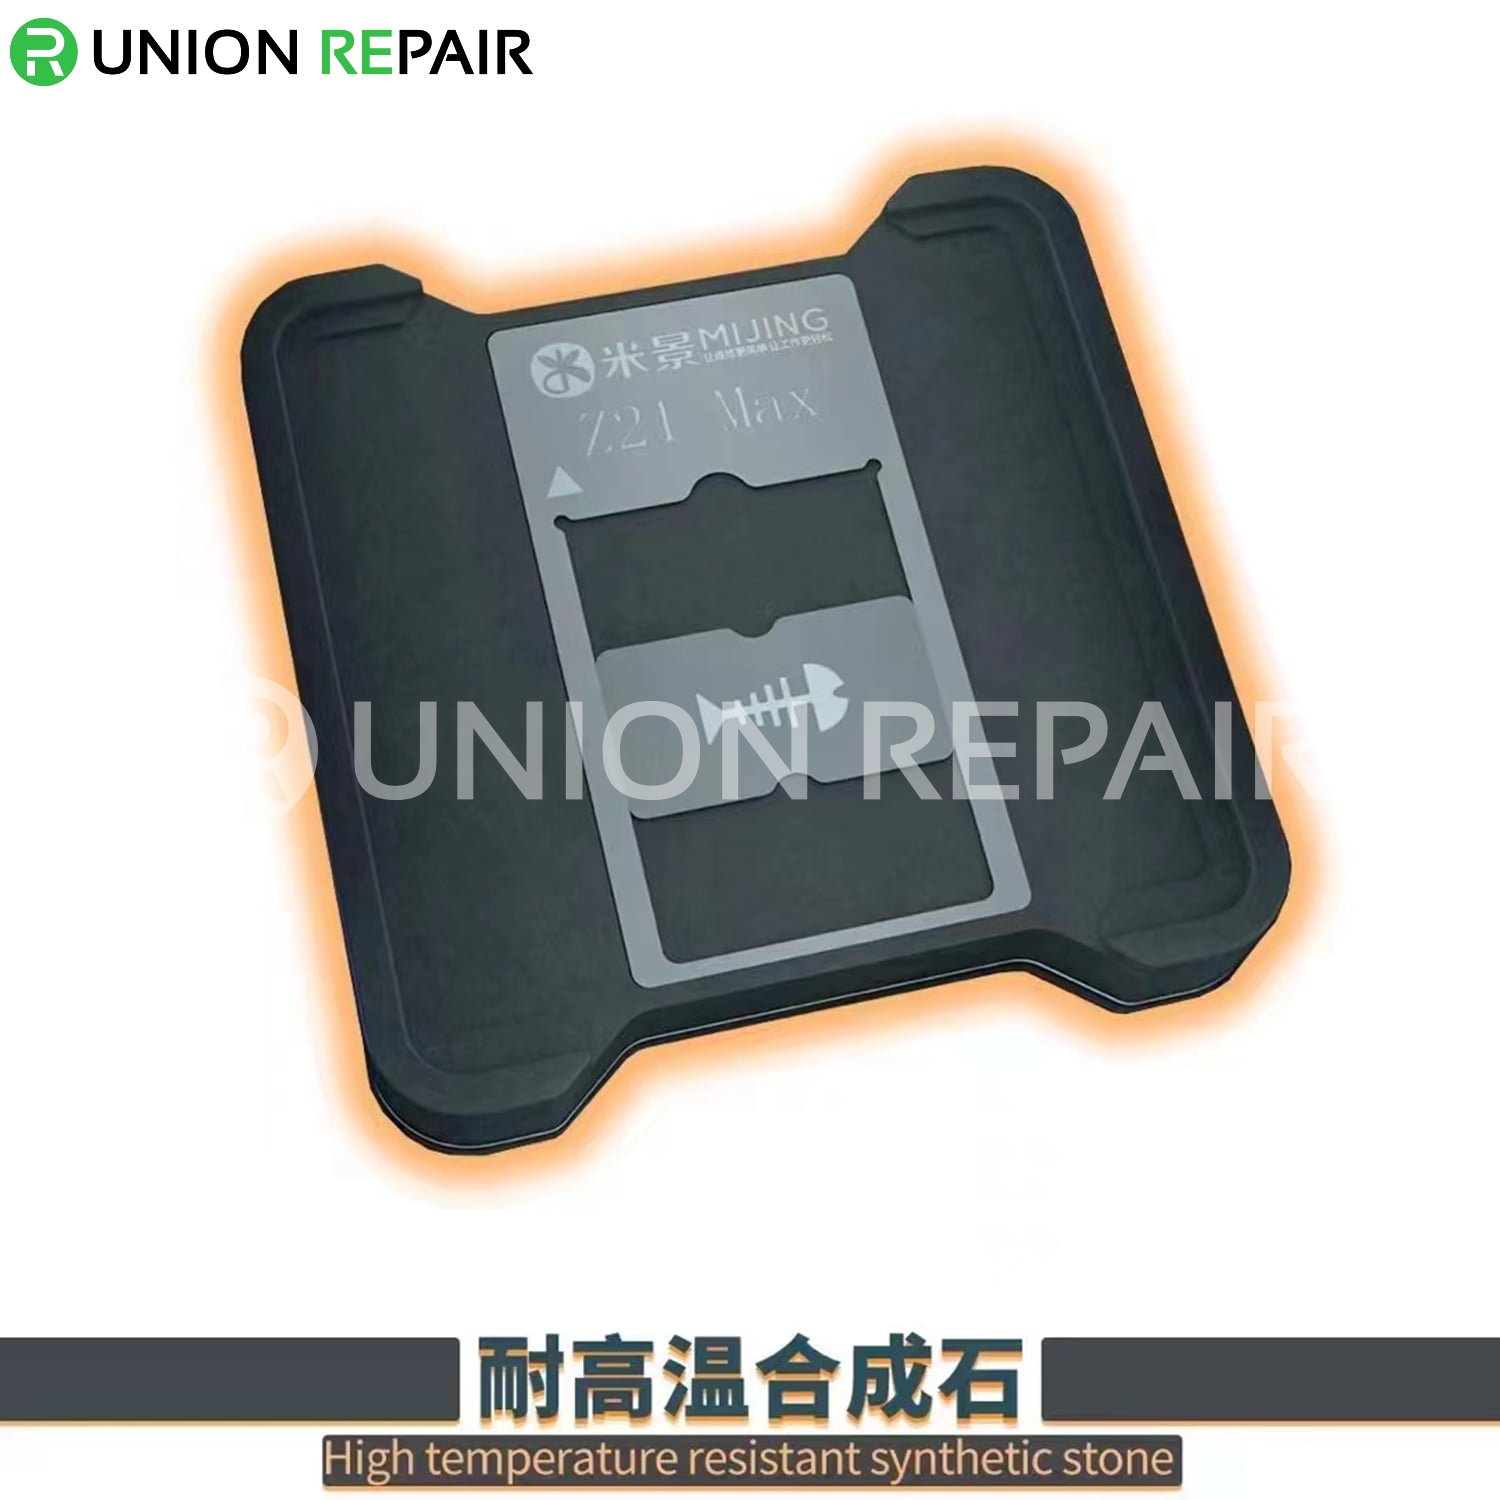 MiJing Z21 Max CPU IC Chip Reballing Stencil Station for iPhone Android